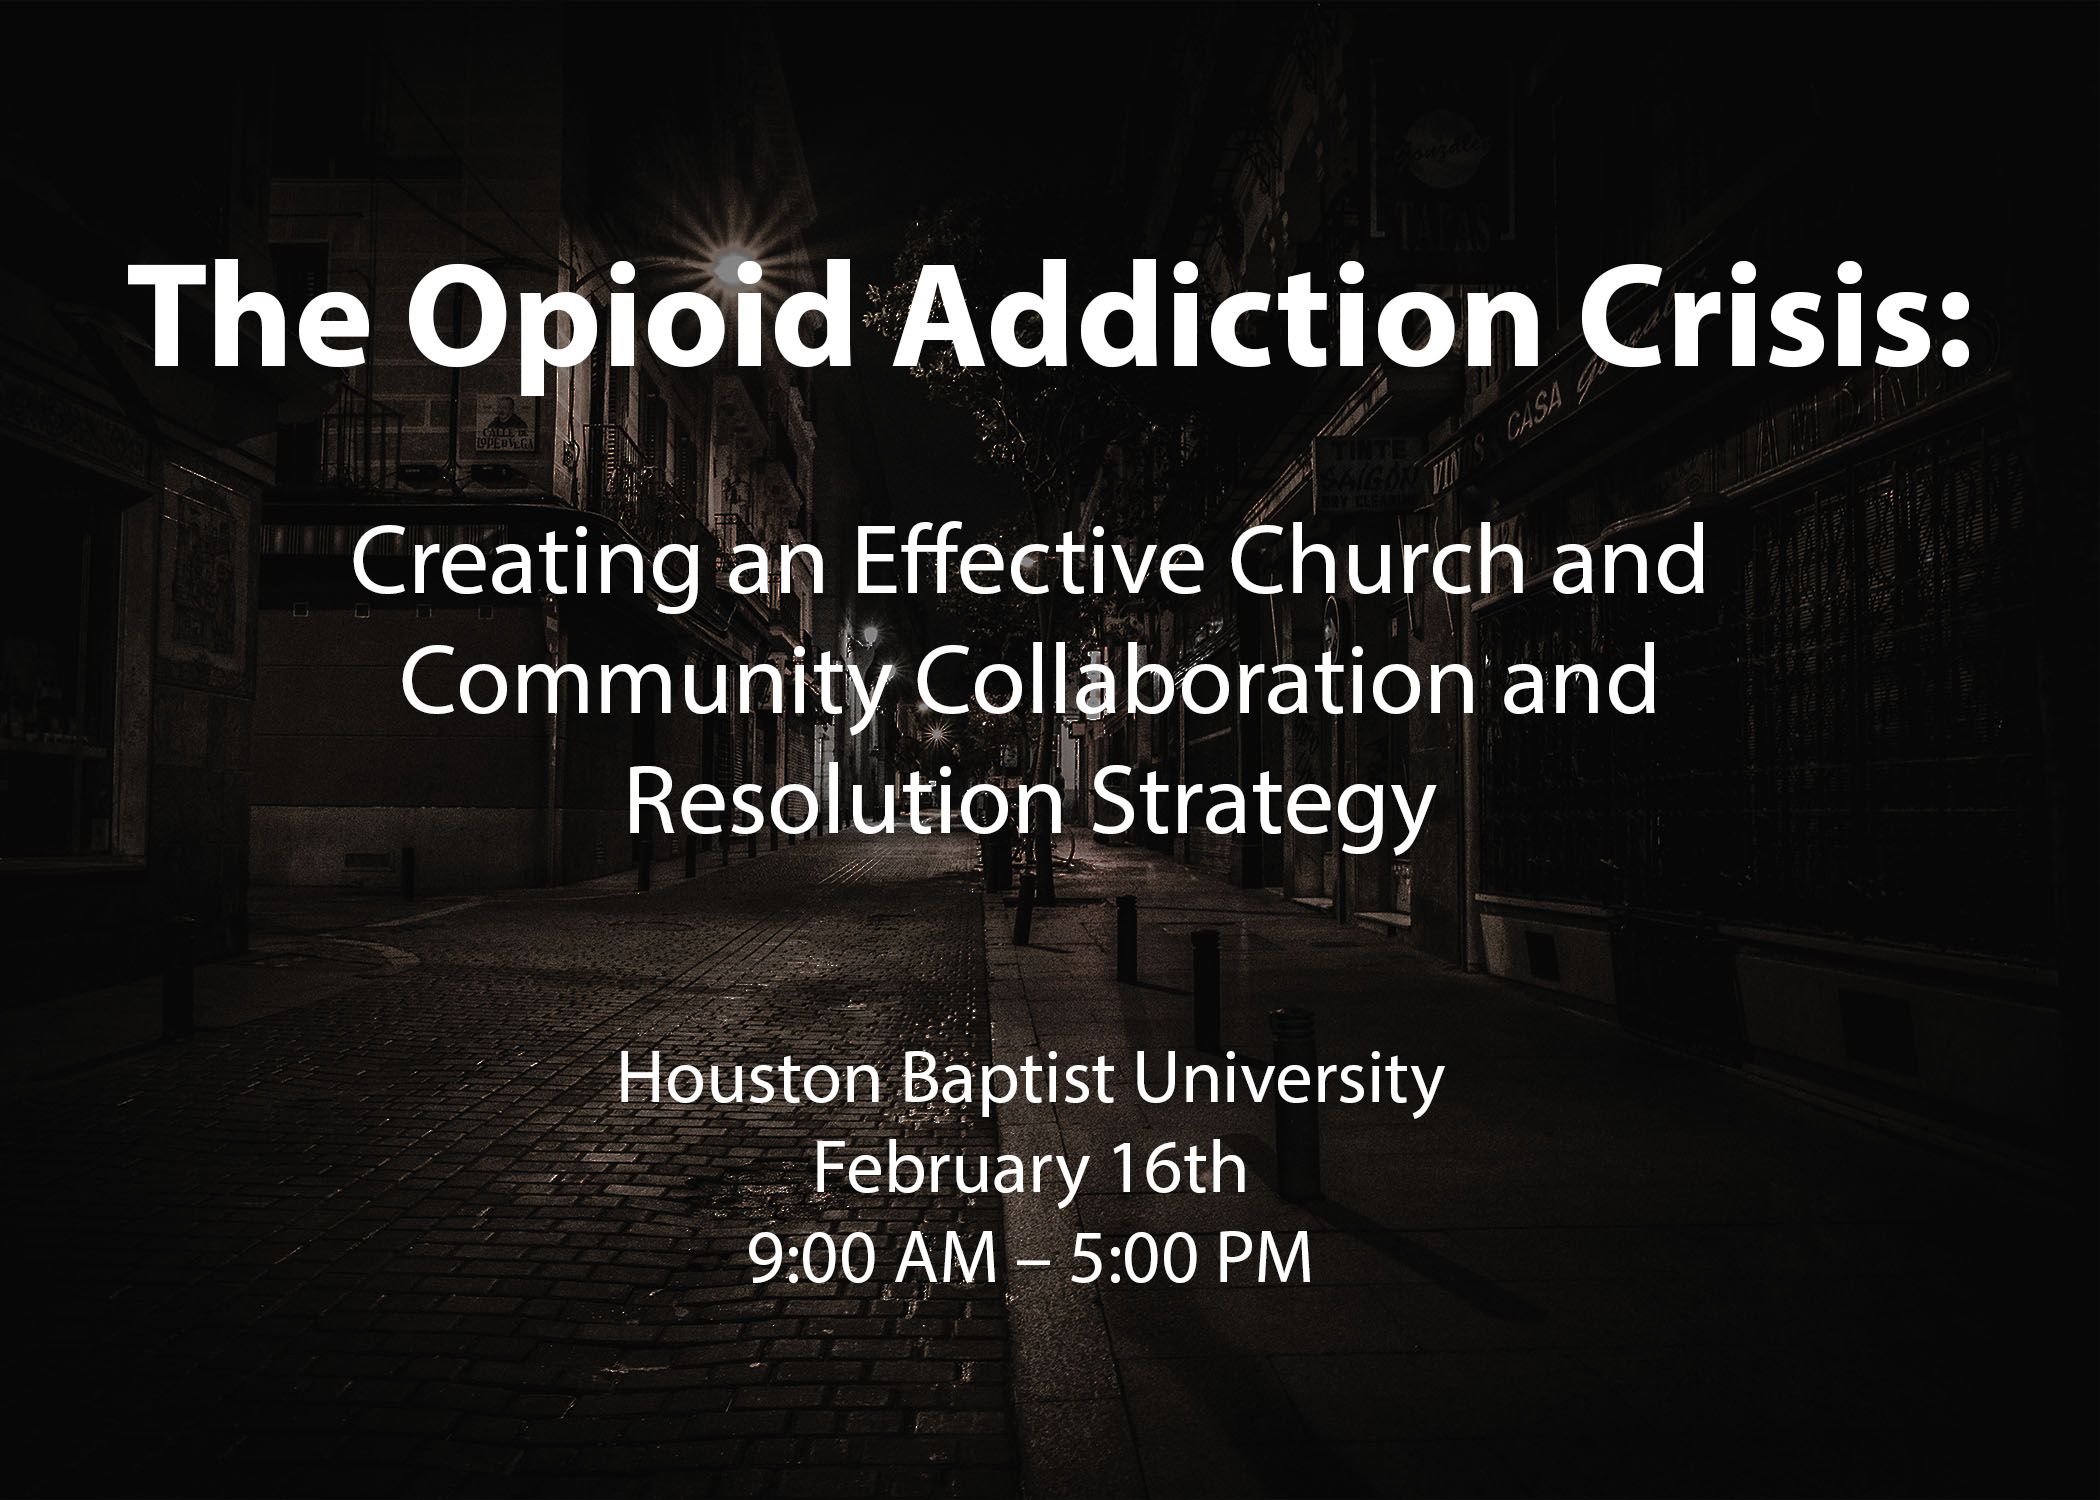 The Opioid Addiction Crisis: Creating an Effective Church and Community Collaboration and Resolution Strategy